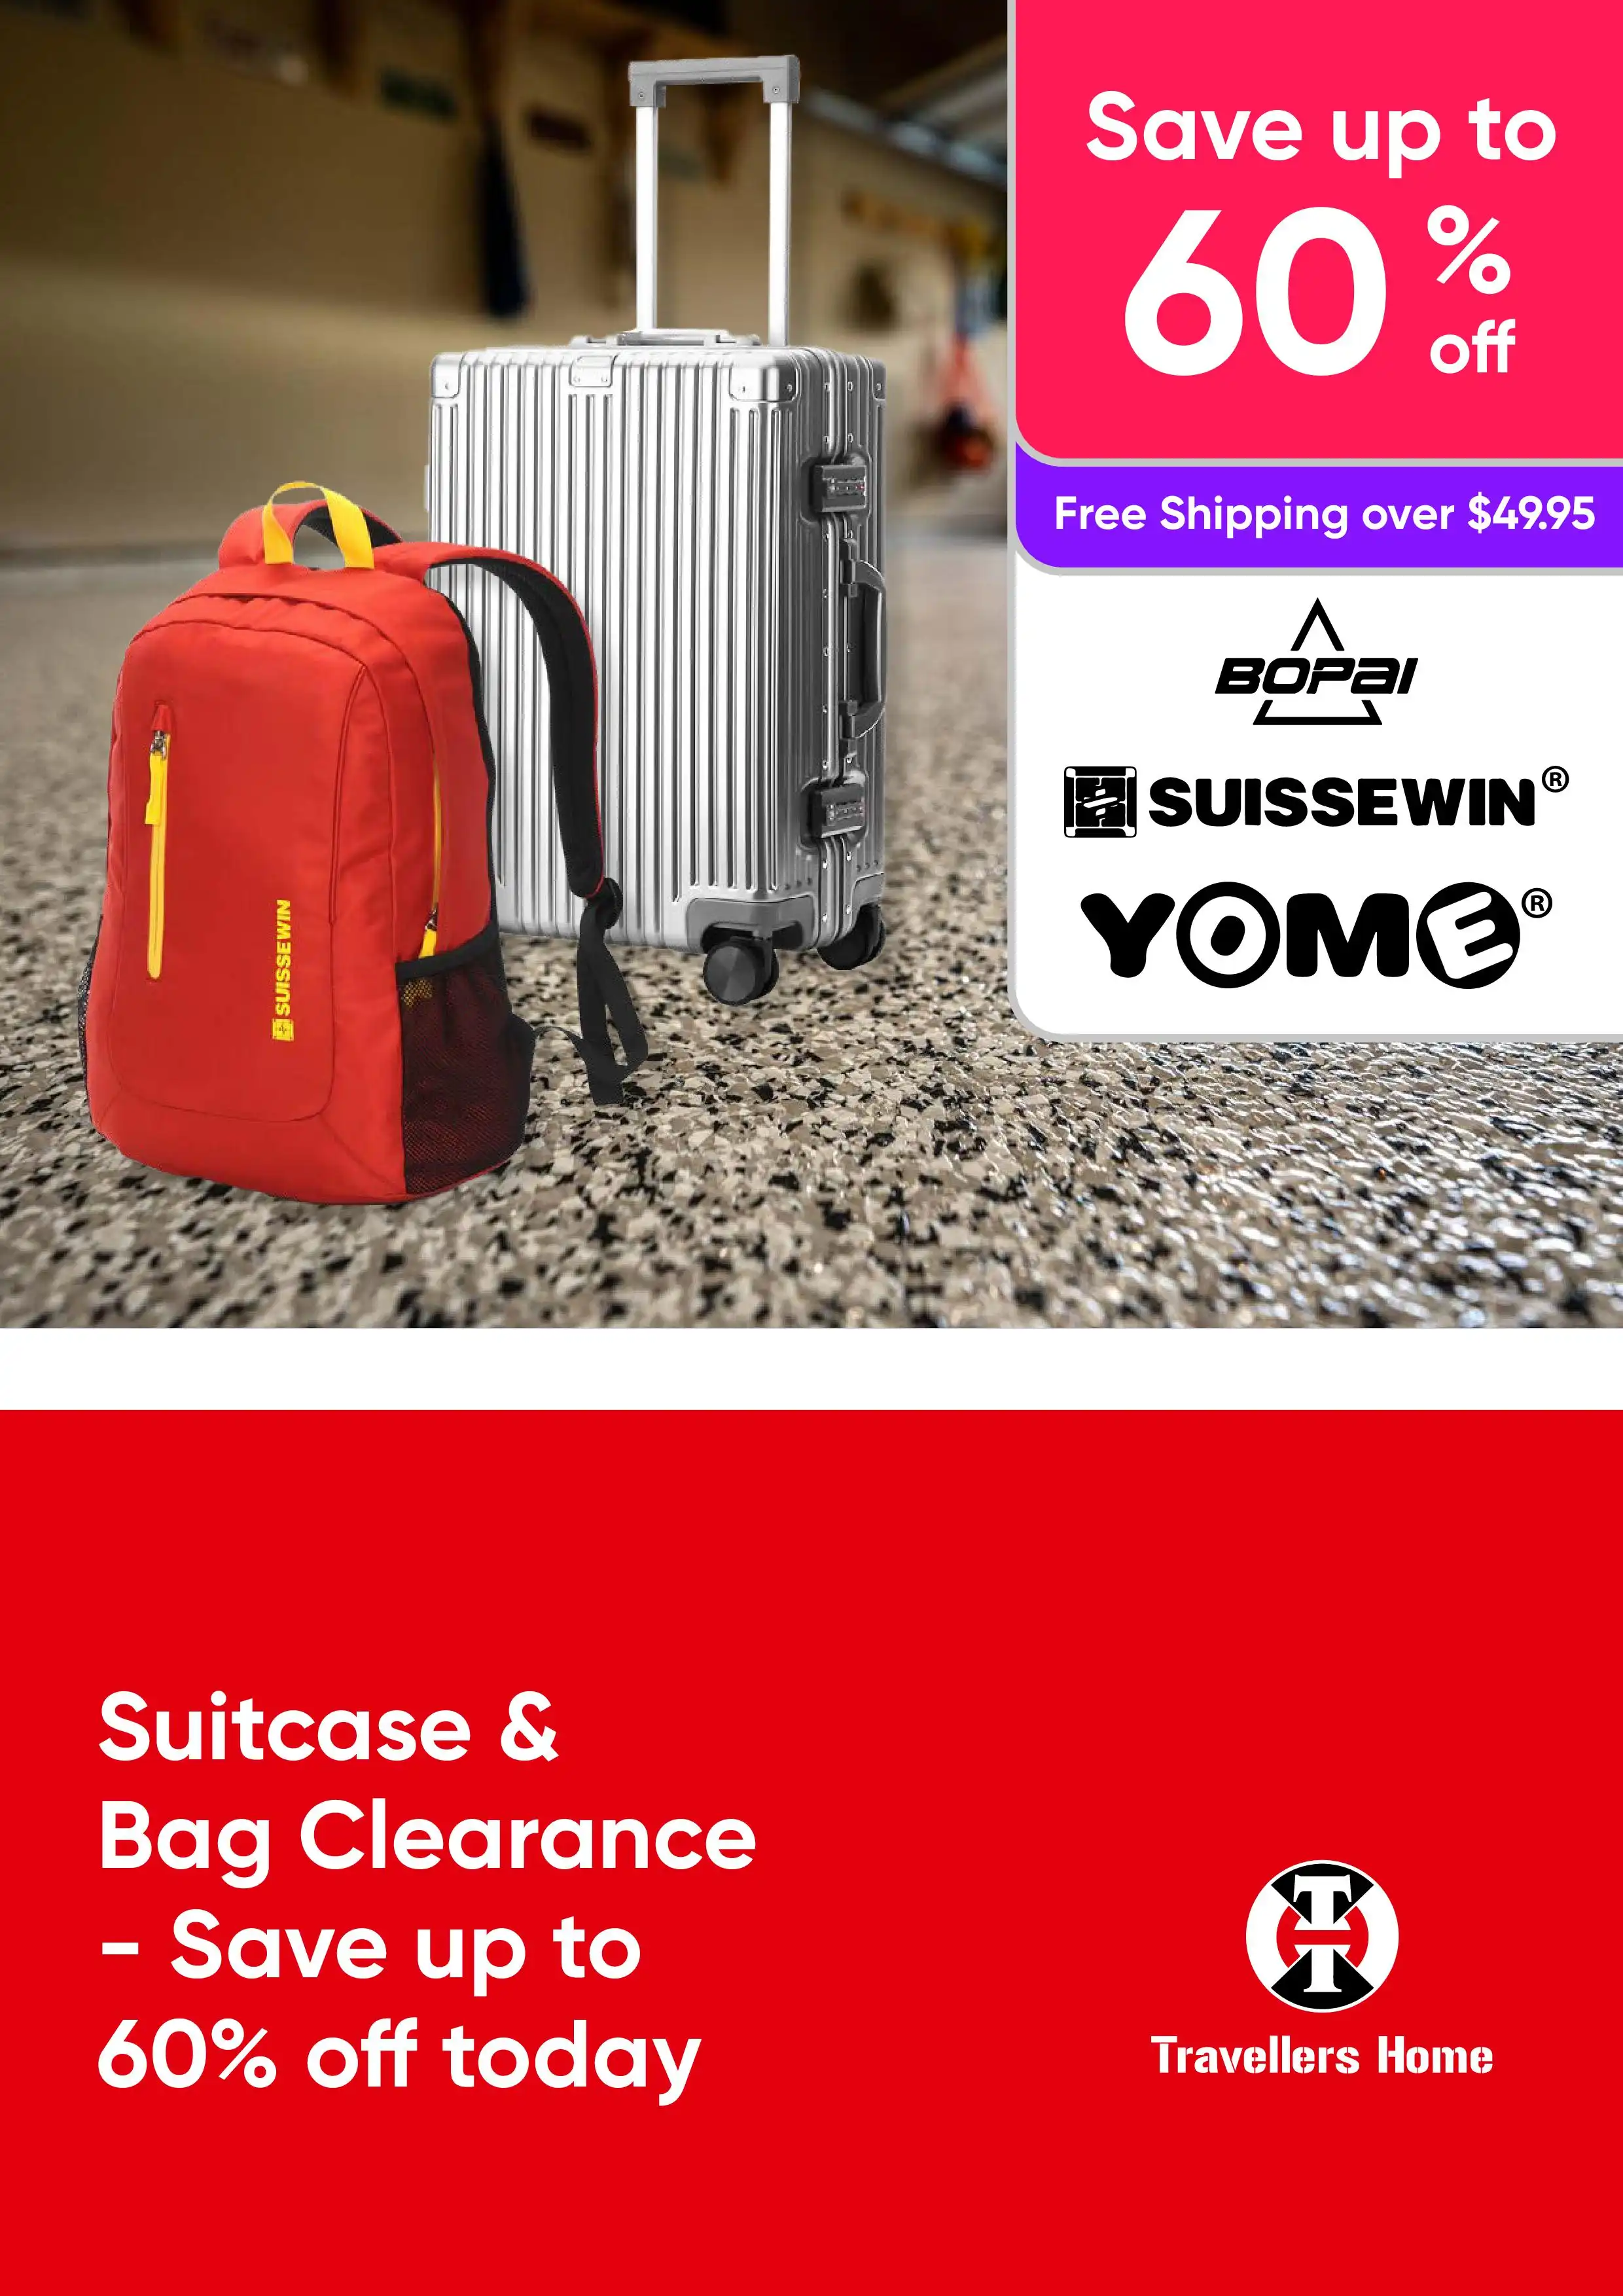 Suitcase & Bag Clearance - Save up to 60% today